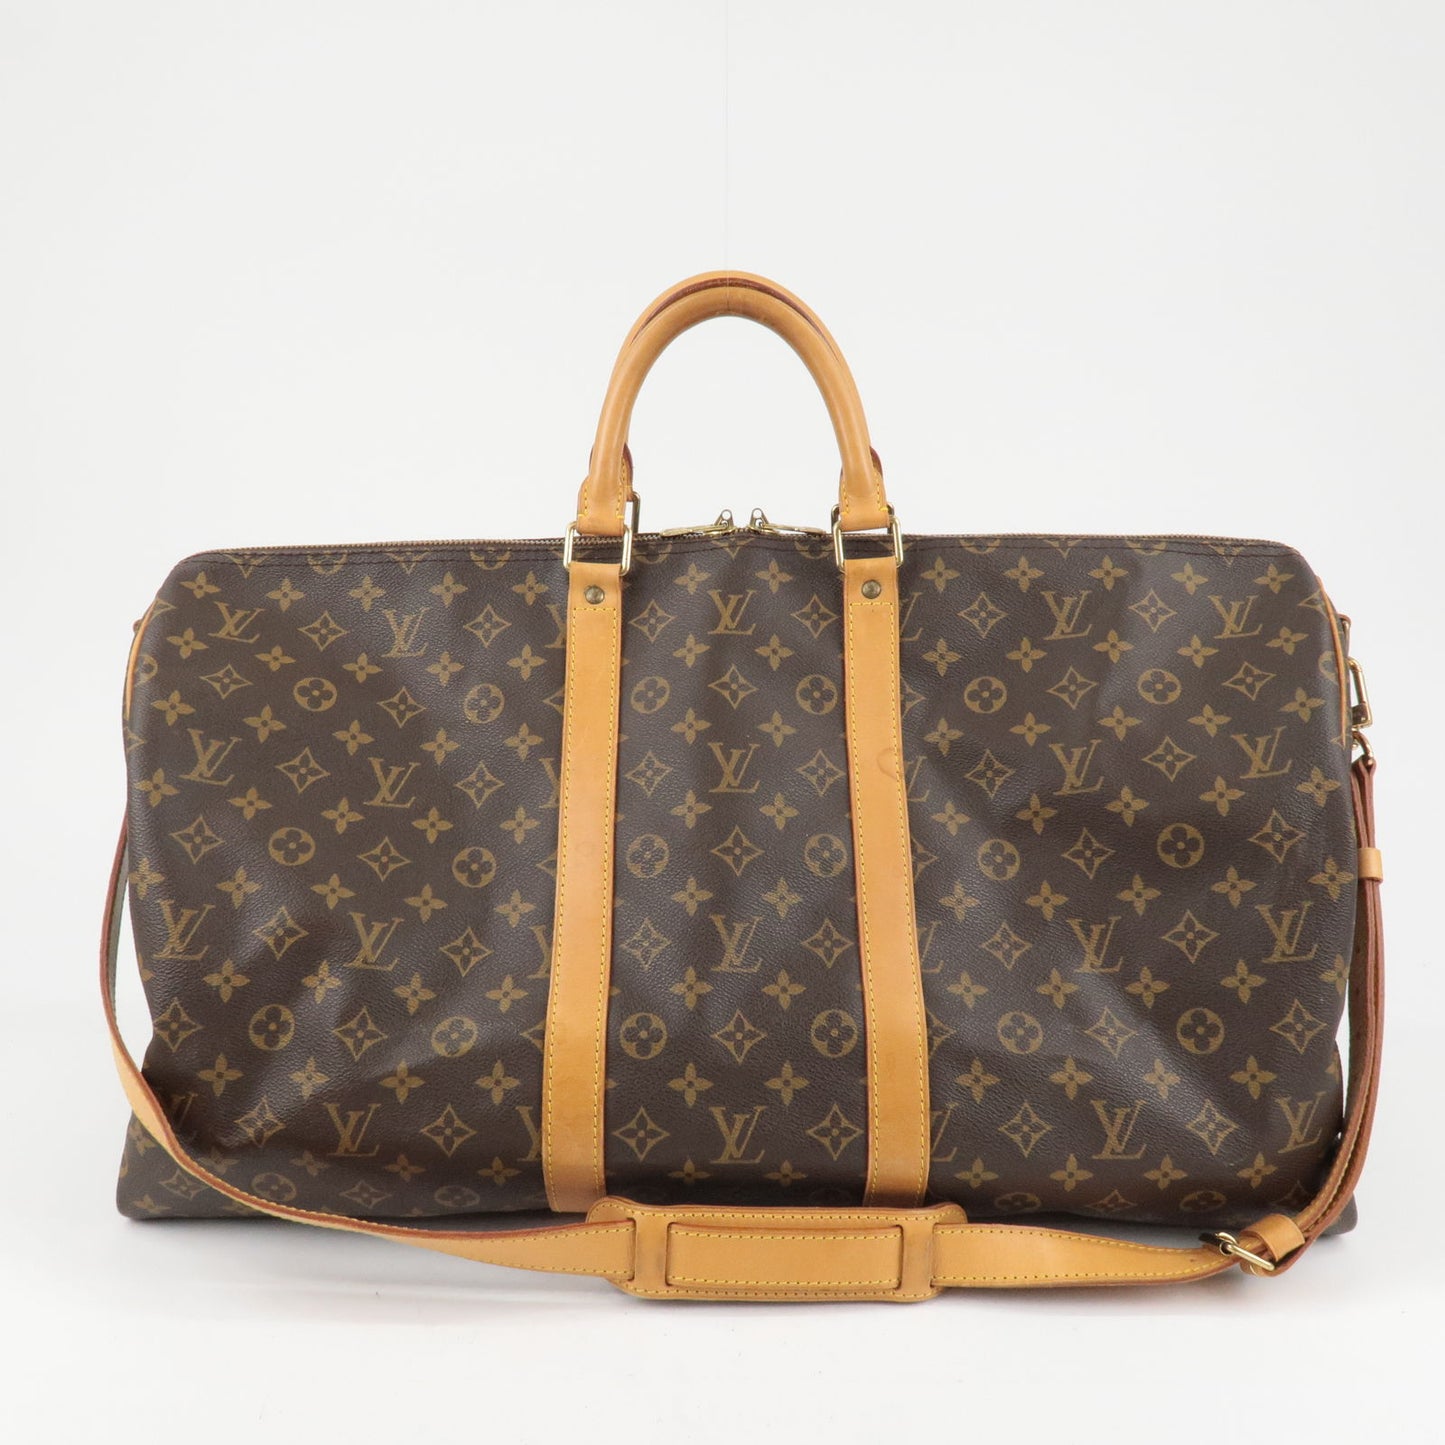 Tuileries Leather Shoulder Bag (Authentic Pre-Owned)  Shoulder bag,  Leather shoulder bag, Louis vuitton bag neverfull